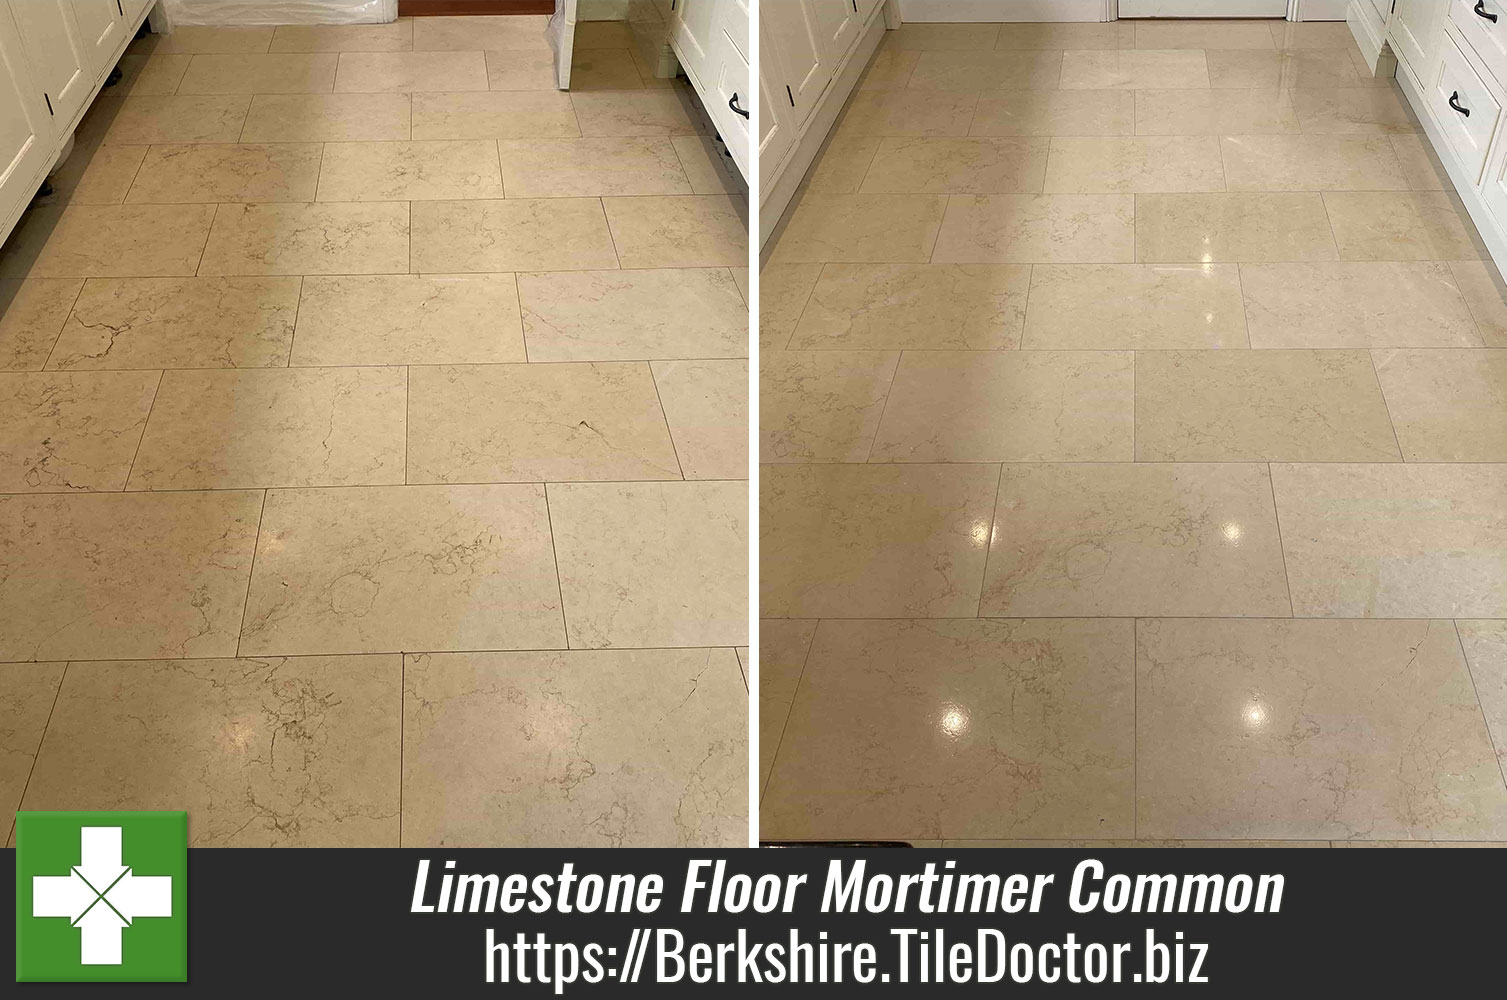 Tile Doctor Remove and Go used to Remove a Topical Sealer from Jerusalem Limestone floor tiles in Reading Berkshire